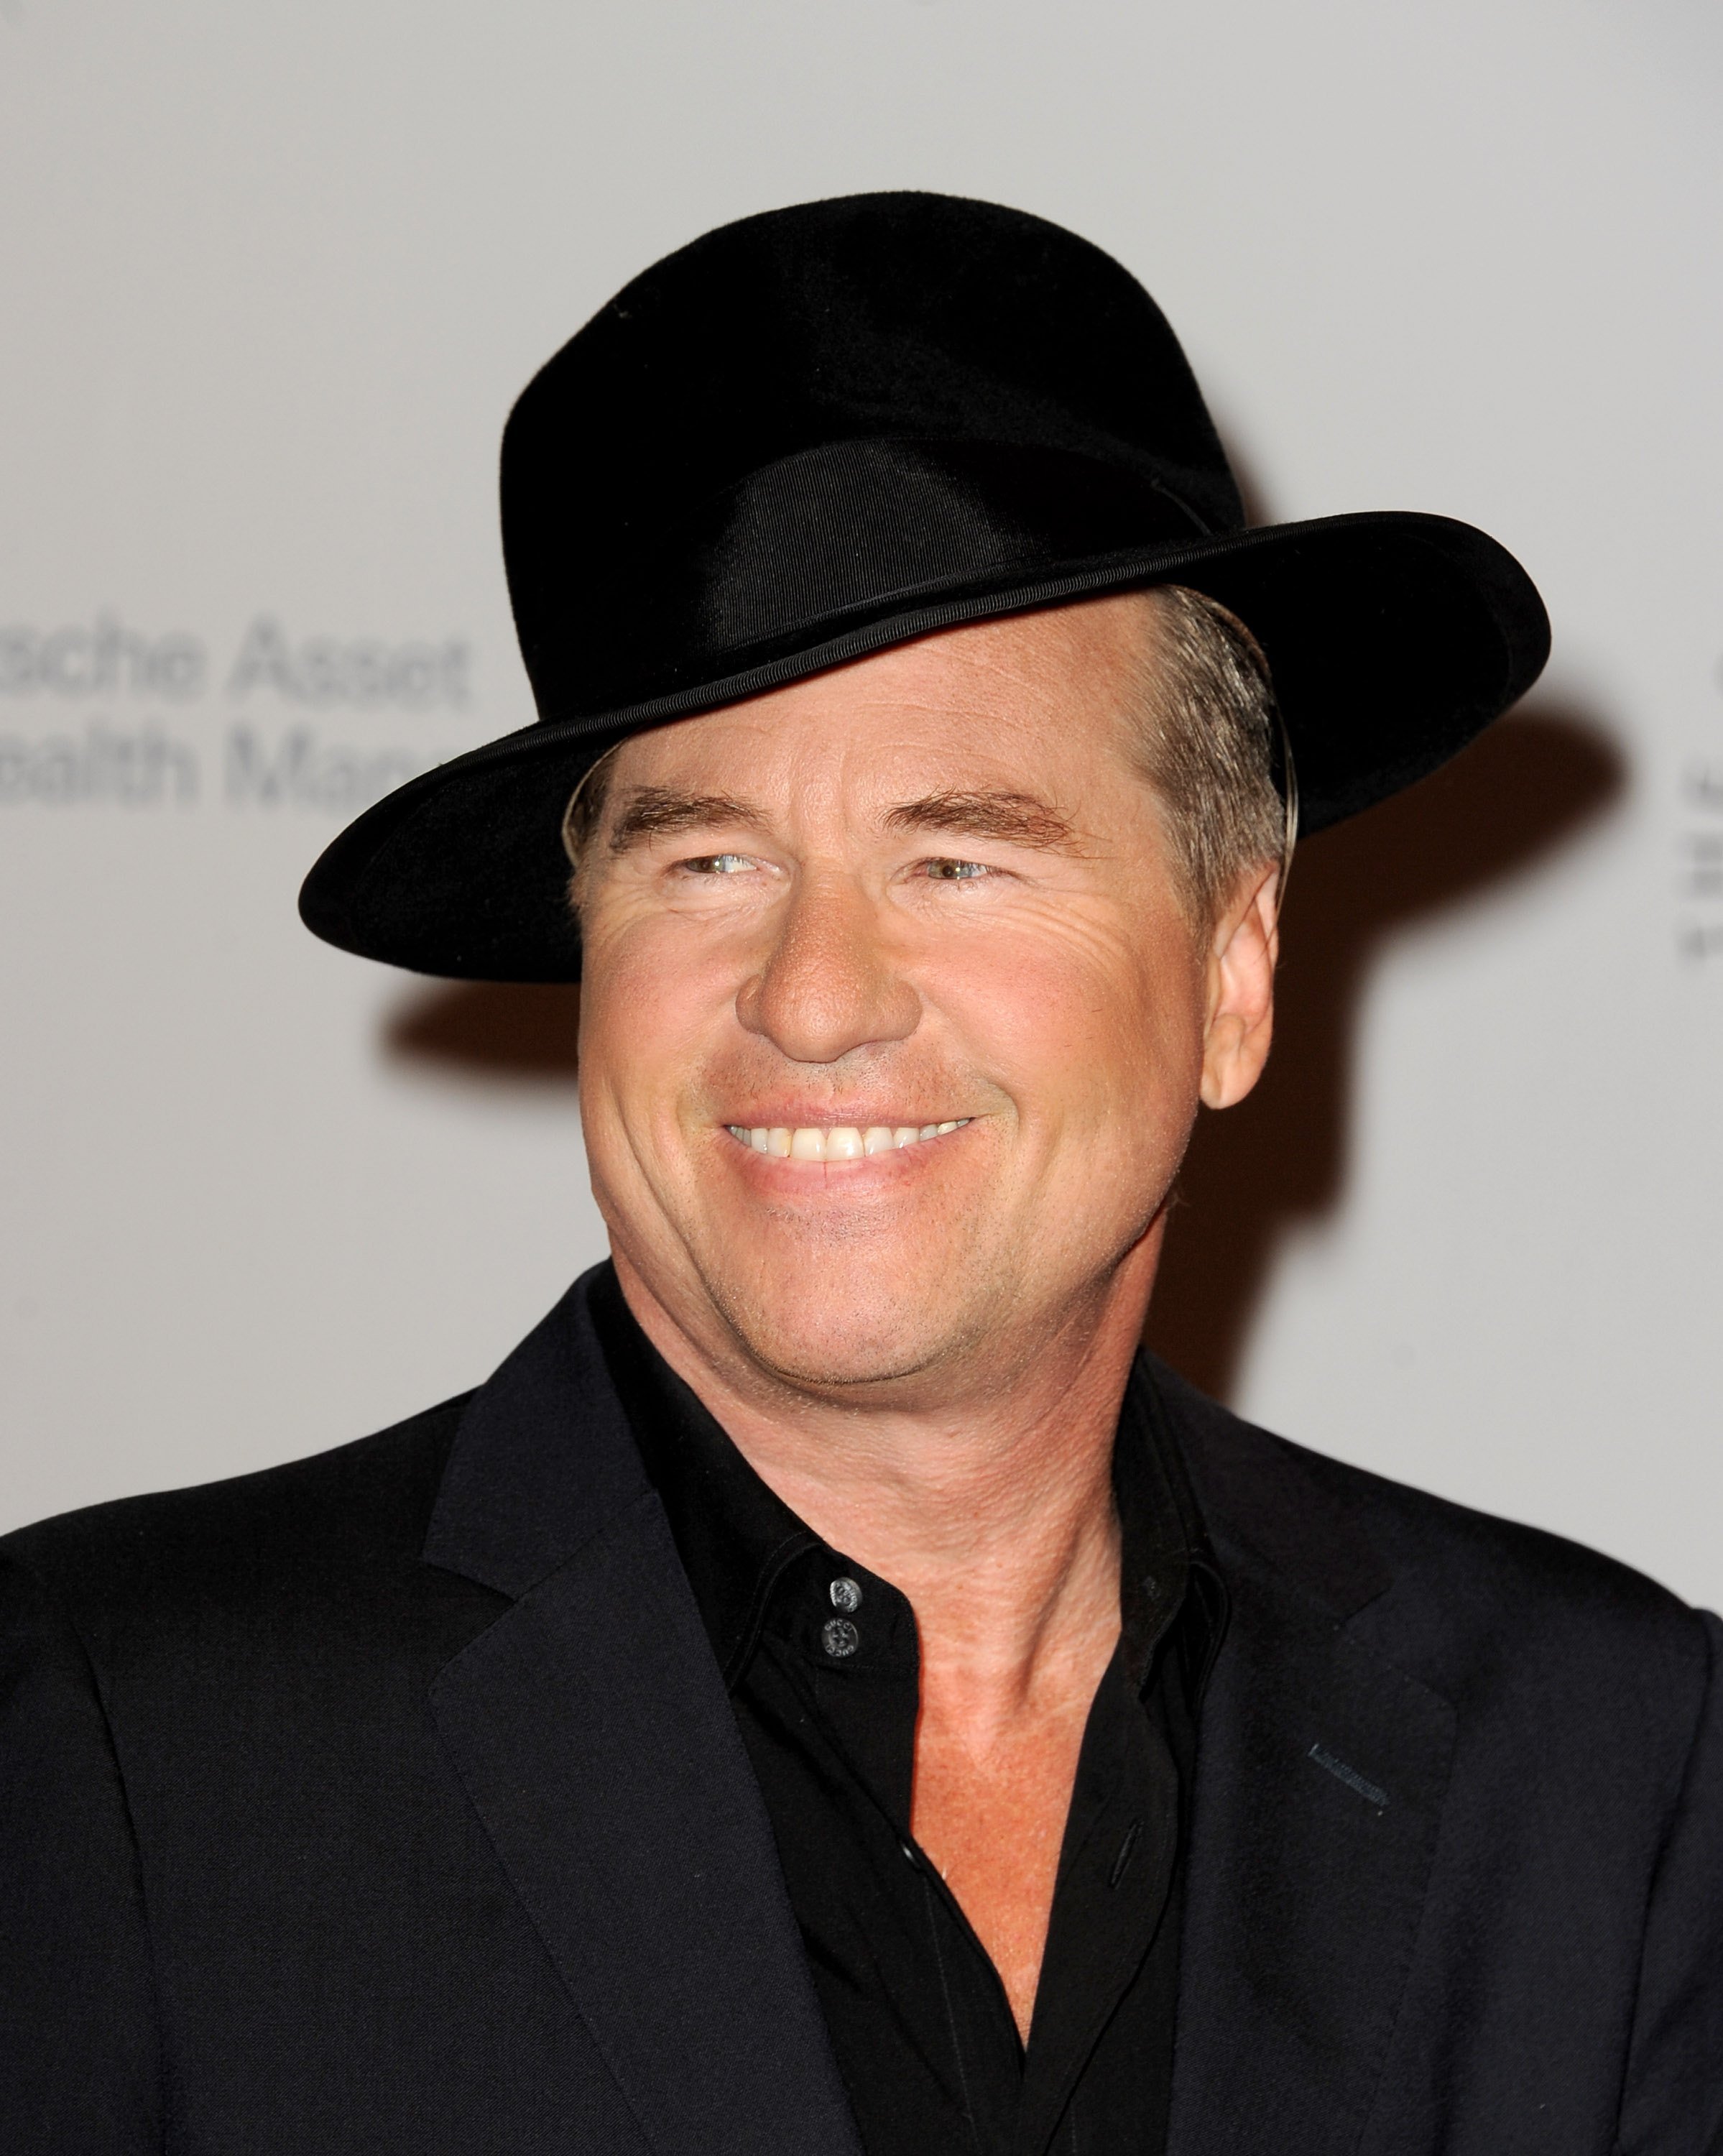 Val Kilmer arrives at the 23rd Annual Simply Shakespeare Benefit reading of "The Two Gentleman of Verona" at The Broad Stage. | Source: Getty Images.